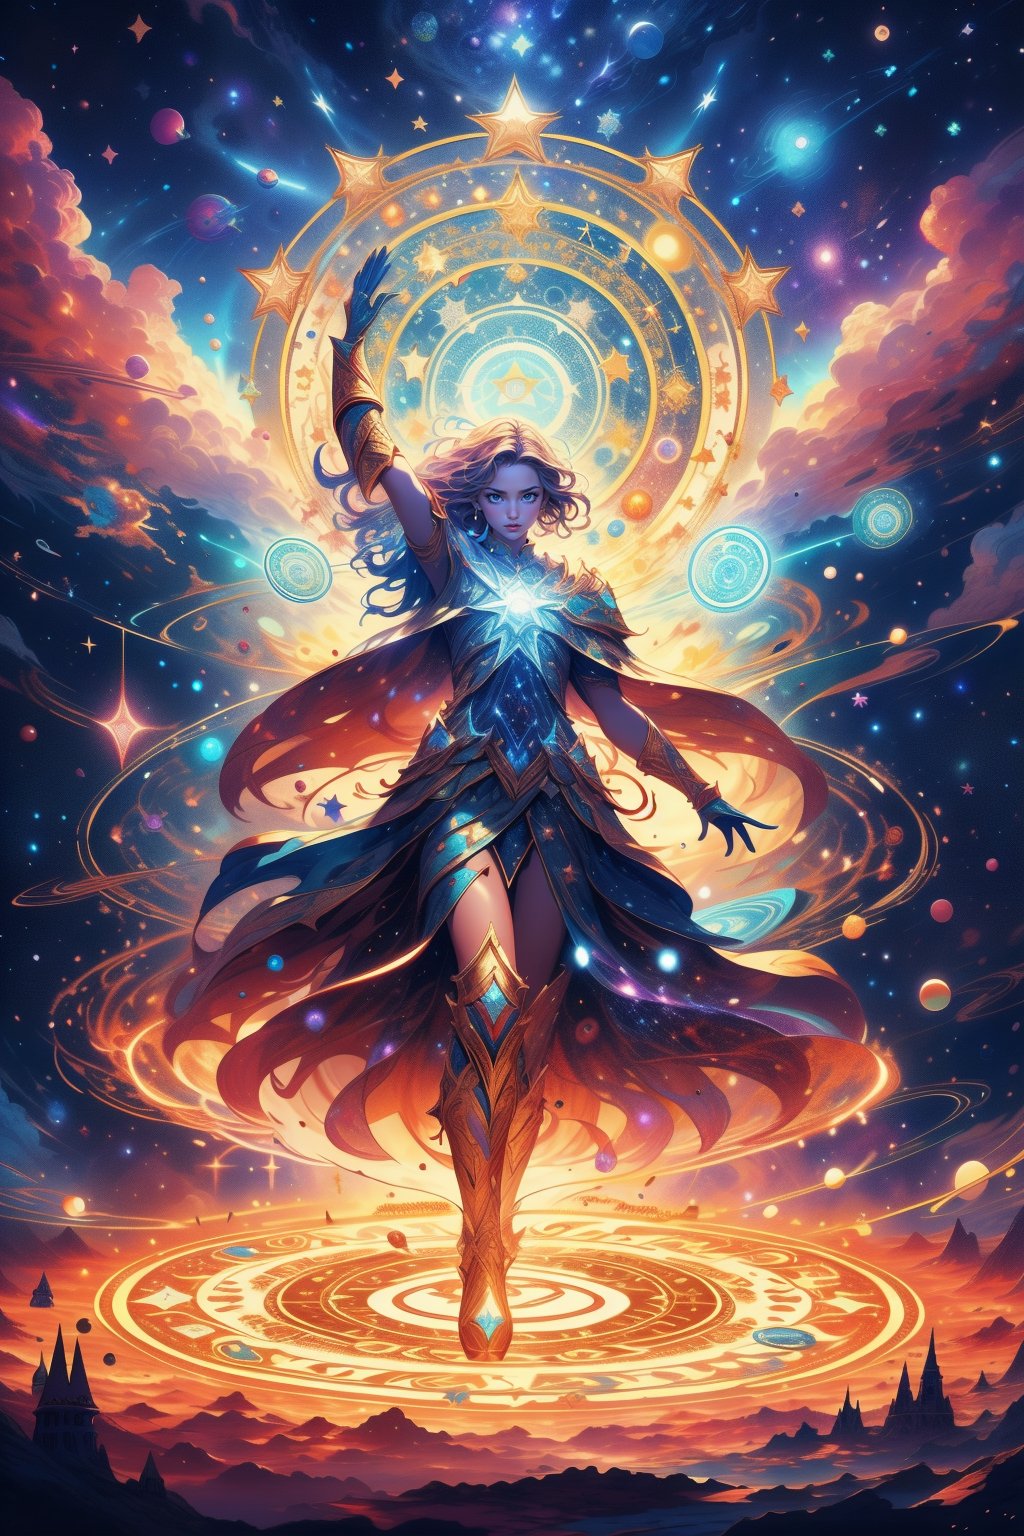 Generate a super exquisite image of a magical female warrior (supermodel). She stands on the magic circle of a six-pointed star, with her hands raised to cast strong magic, space background, magic special effects, light particles,Illustration,portrait,Fantasy,DonMM4g1c